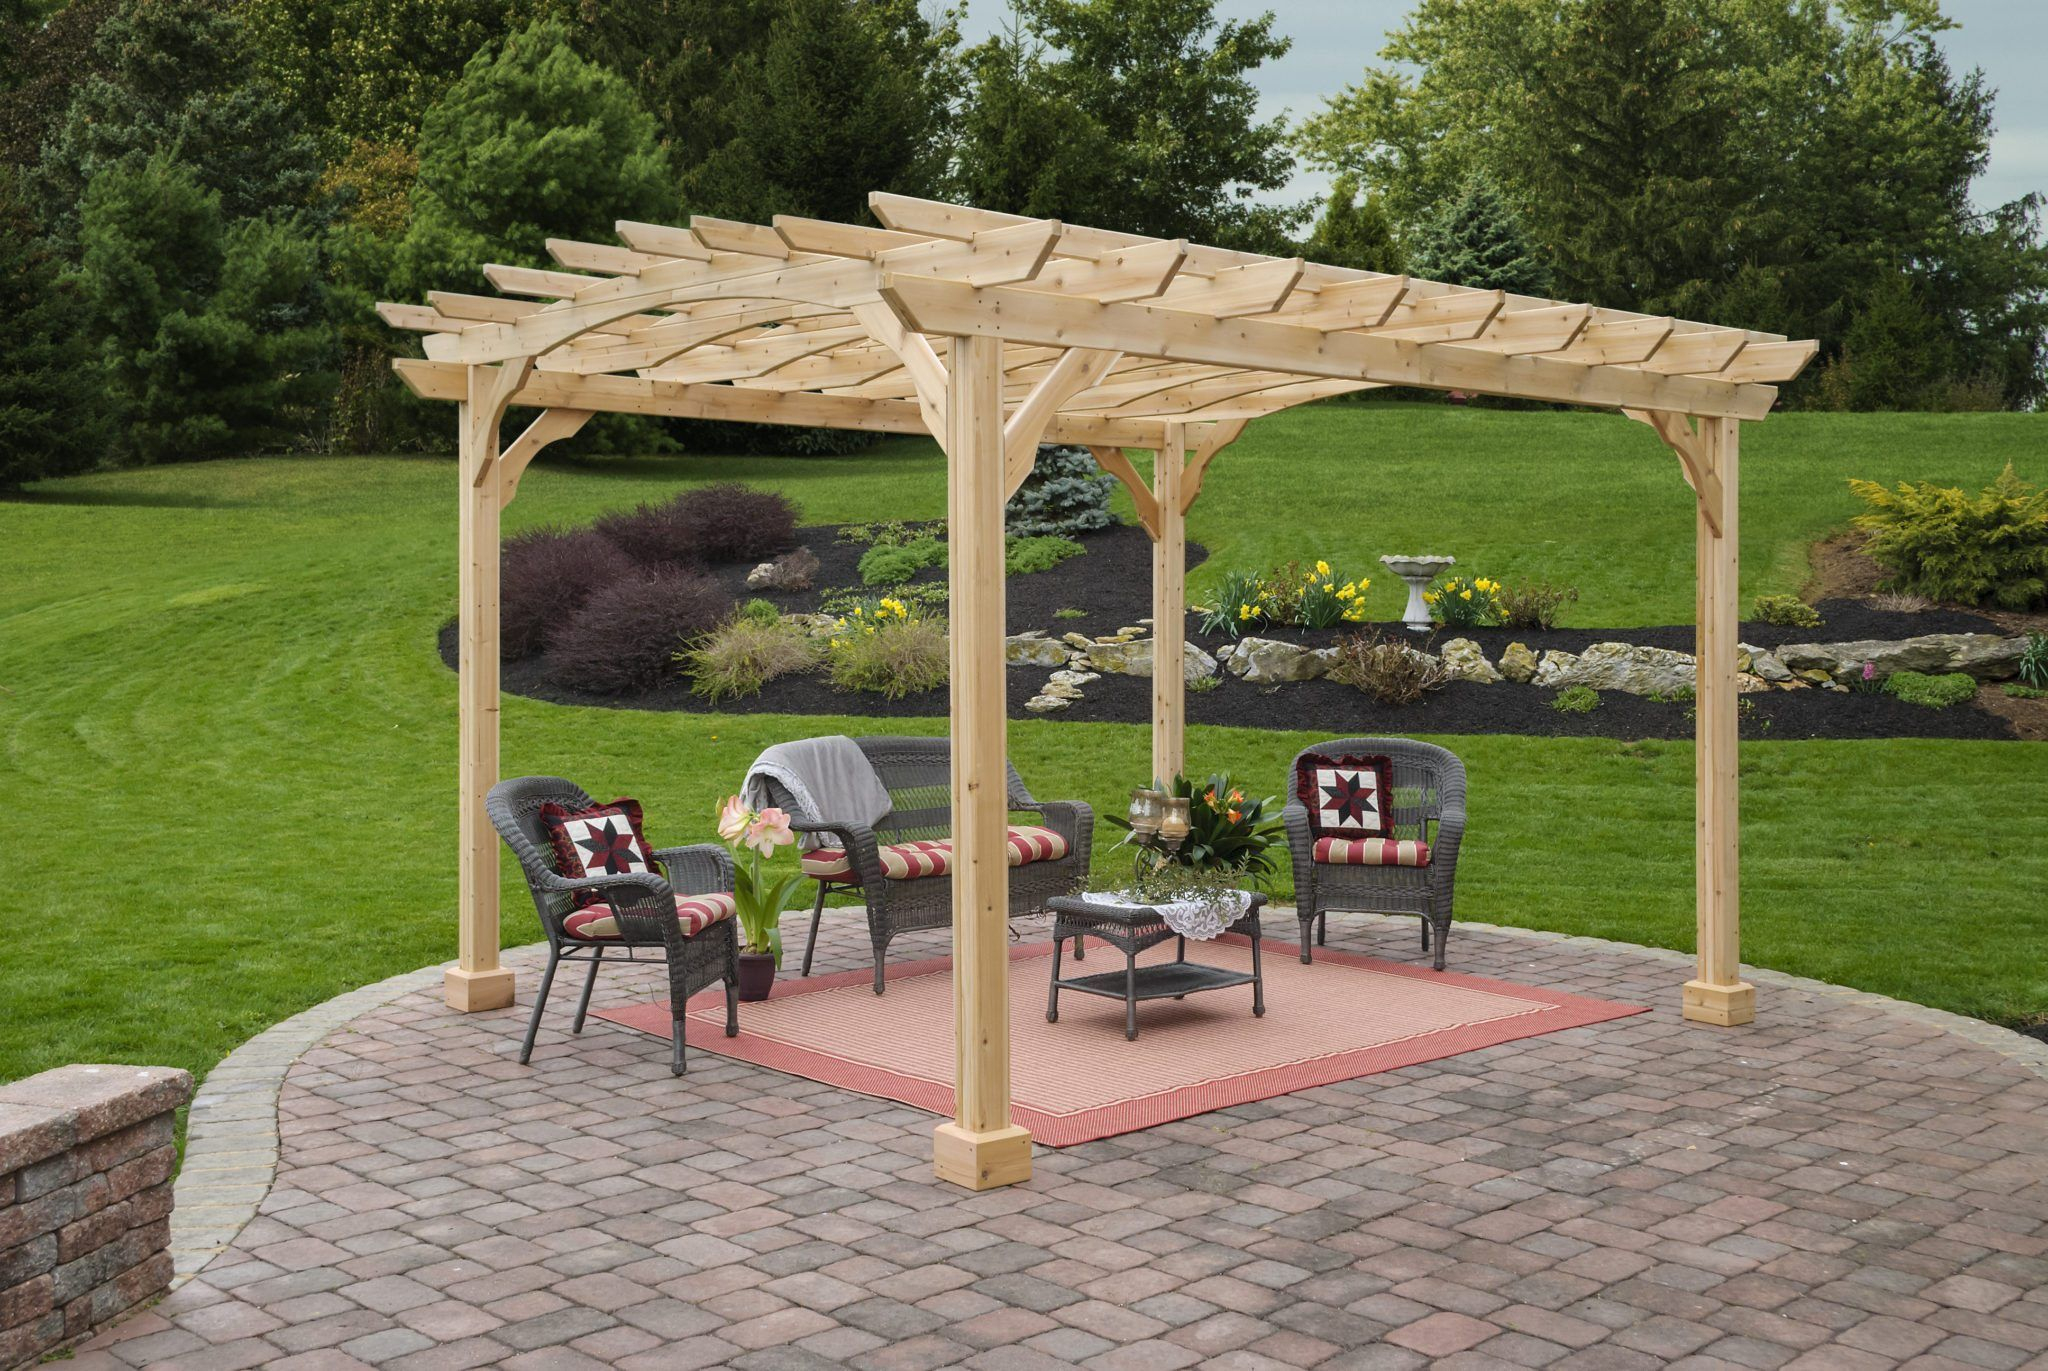 Yardcraft&amp;#039;S Beautifully Hand Made Wood Pergola Kits Are An Affordable concernant Pergola Bois Design intéressant 